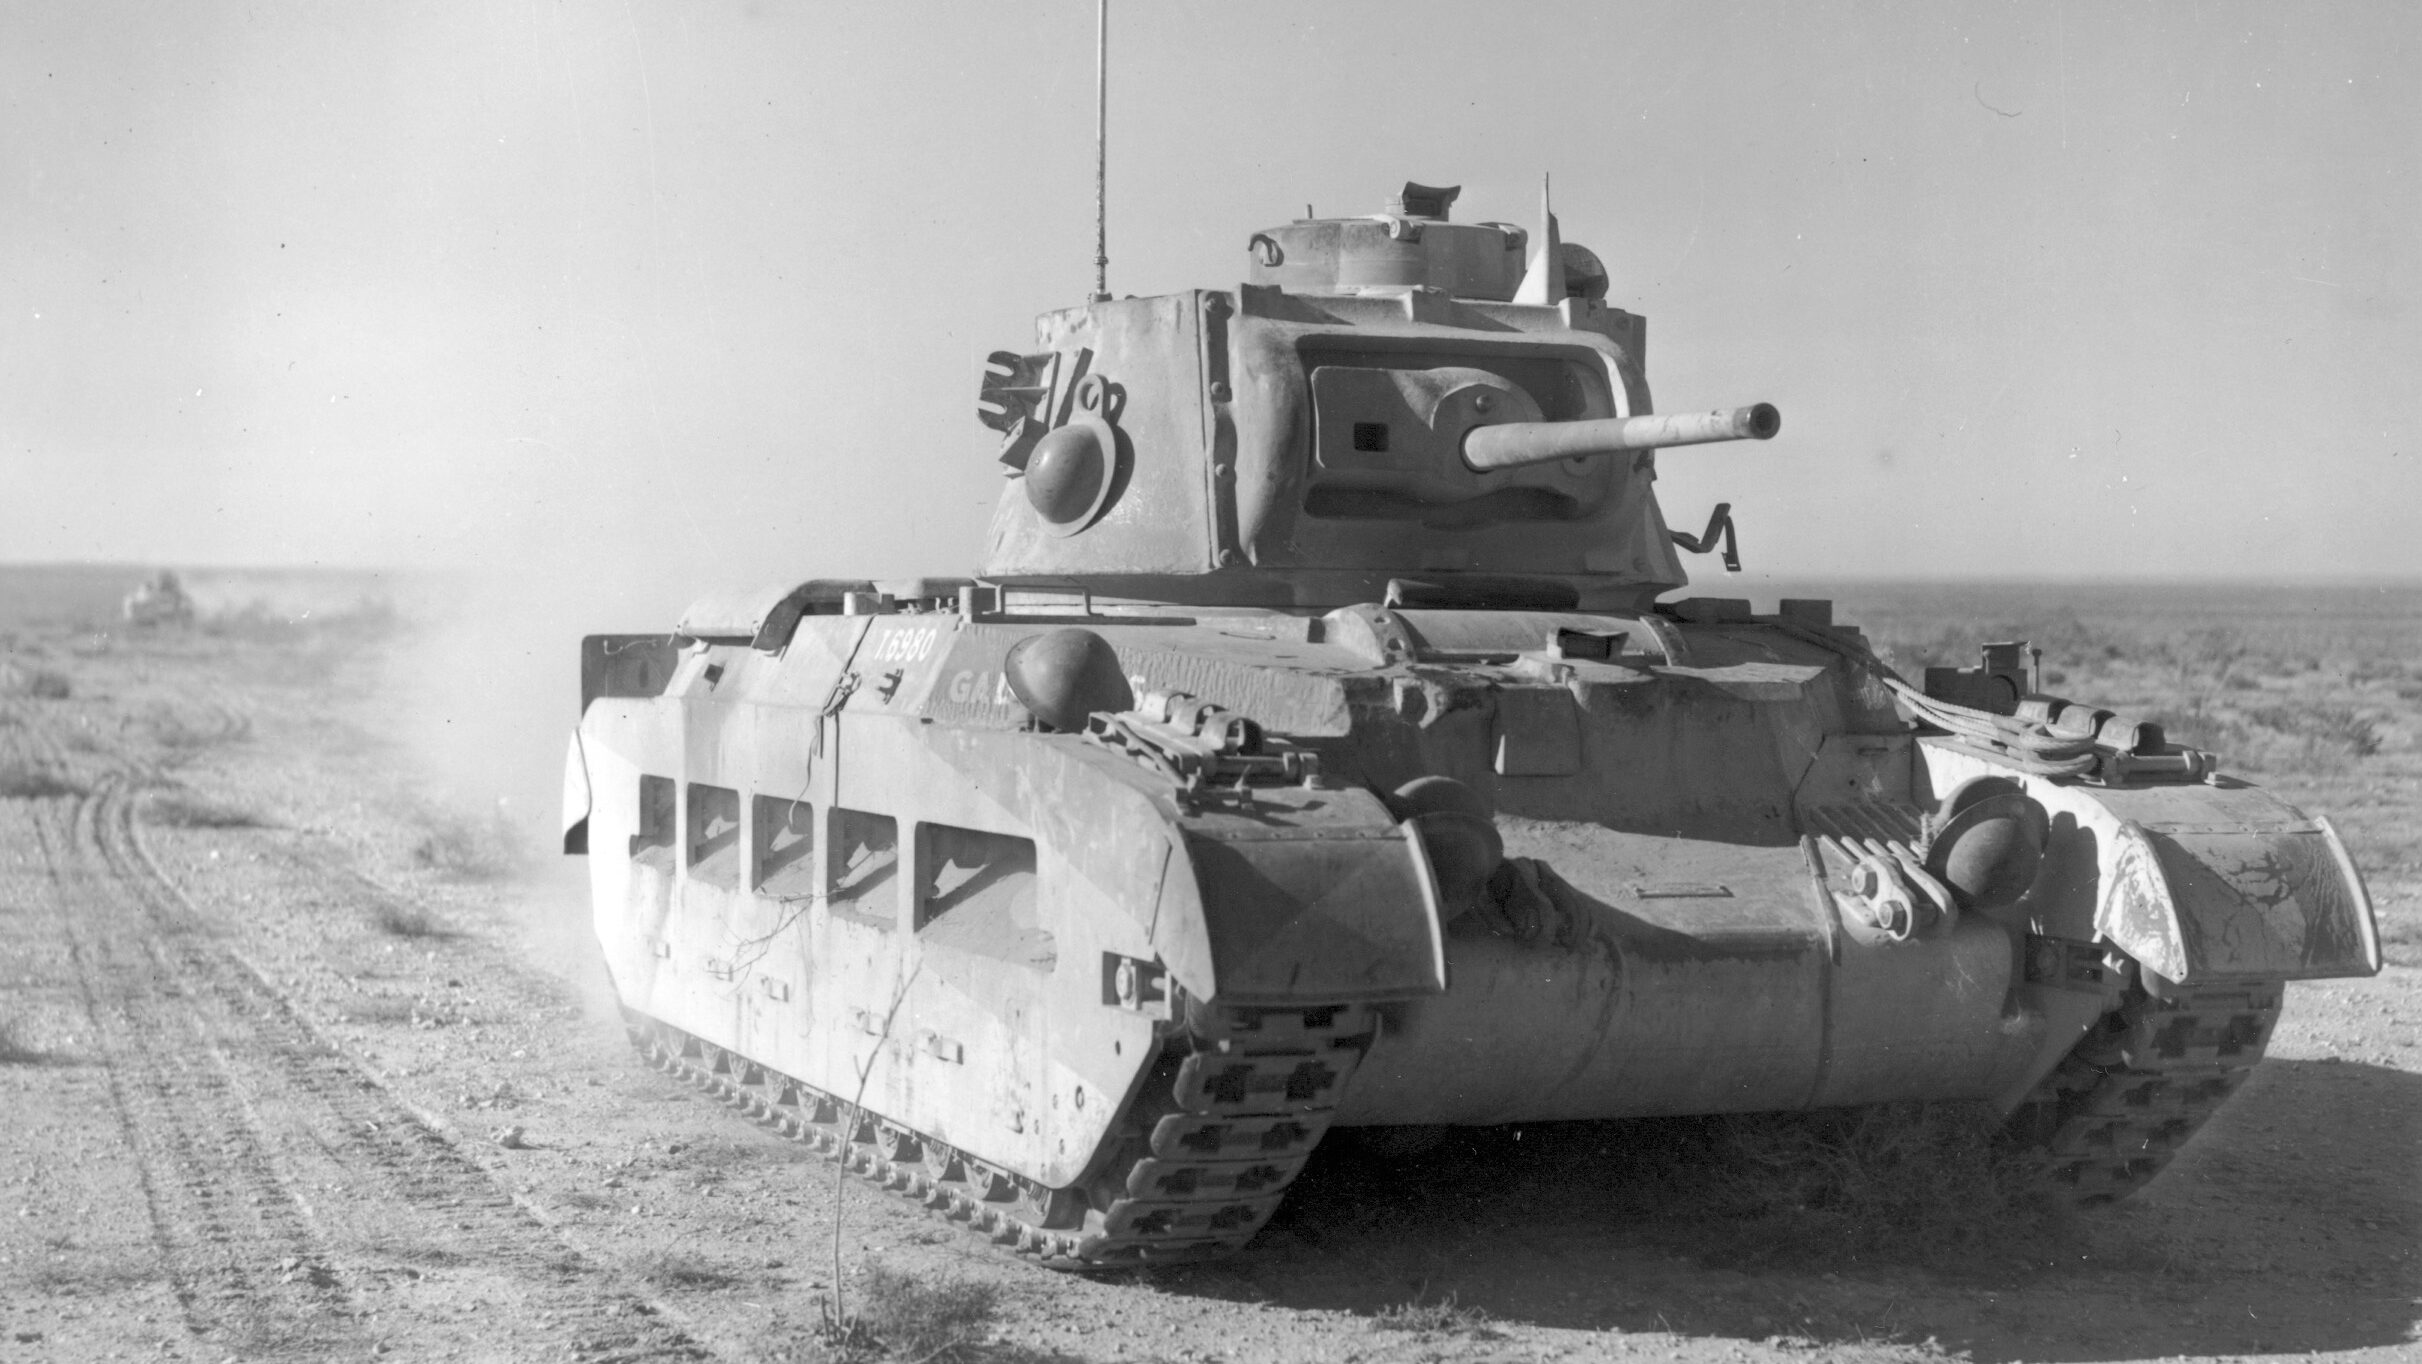 A tough MK II (A14) Matilda tank of the British 7th Royal Tank Regiment stirs up a cloud of desert dust. The most modern tank in the British arsenal at the time of Beda Fomm, the Matilda had surprised Rommel’s elite 7th Panzer Division in May 1940 on the battlefield of Arras in France.